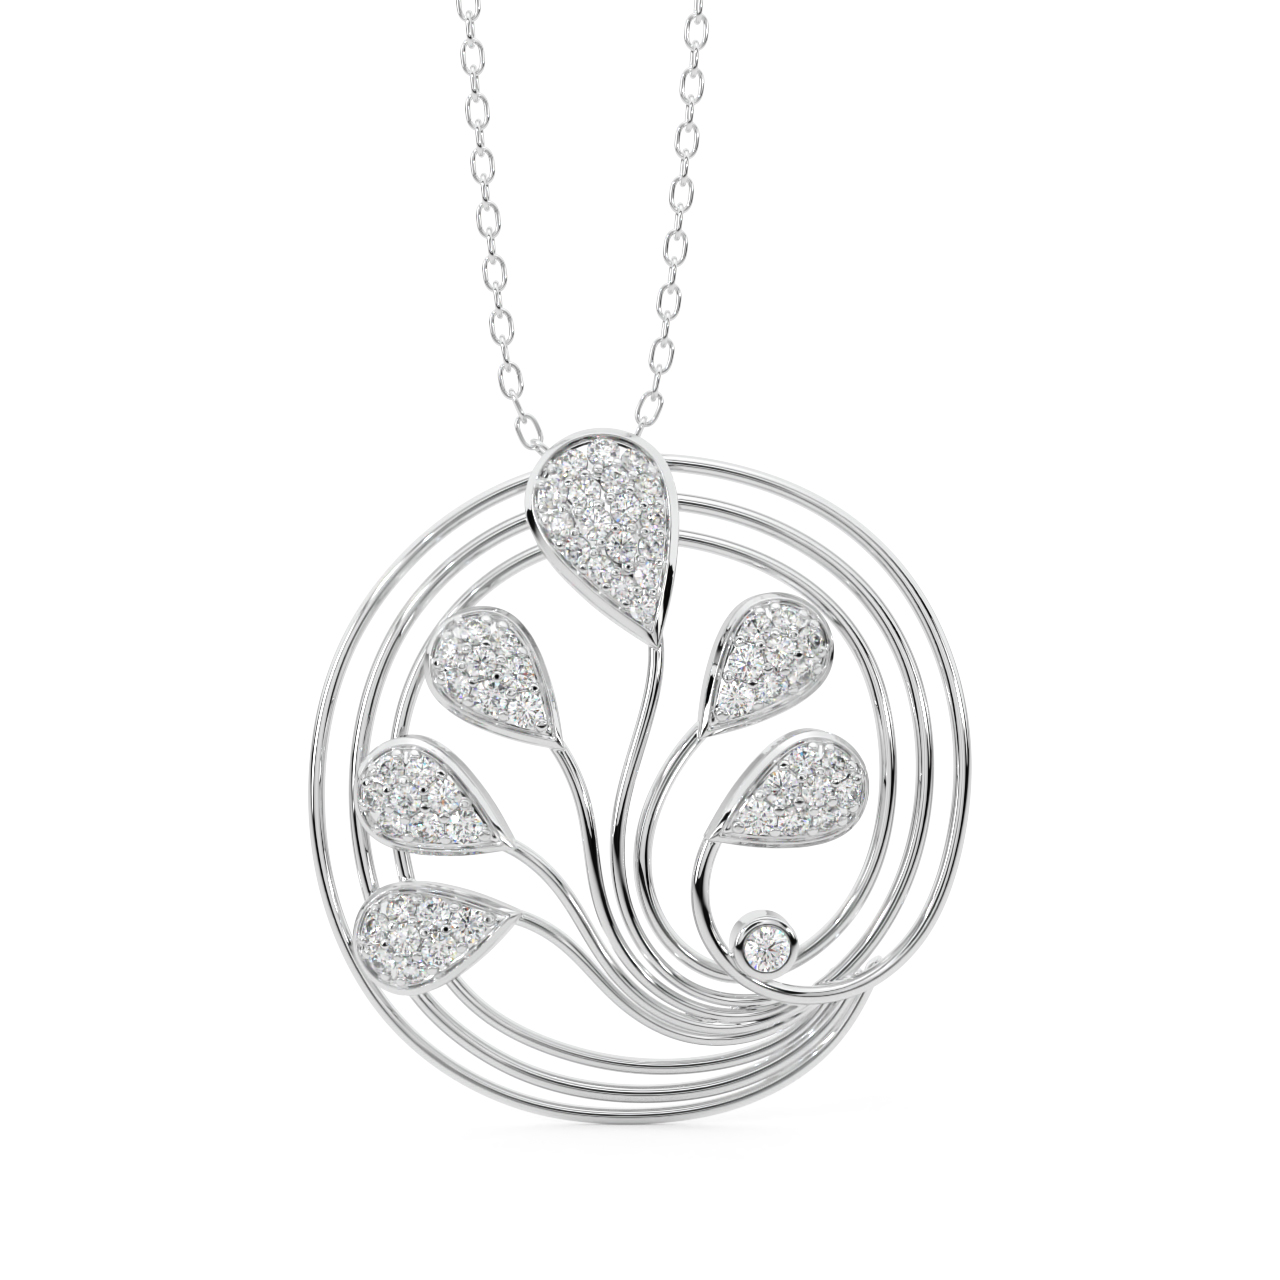 Inspired By Nature Diamond Pendant